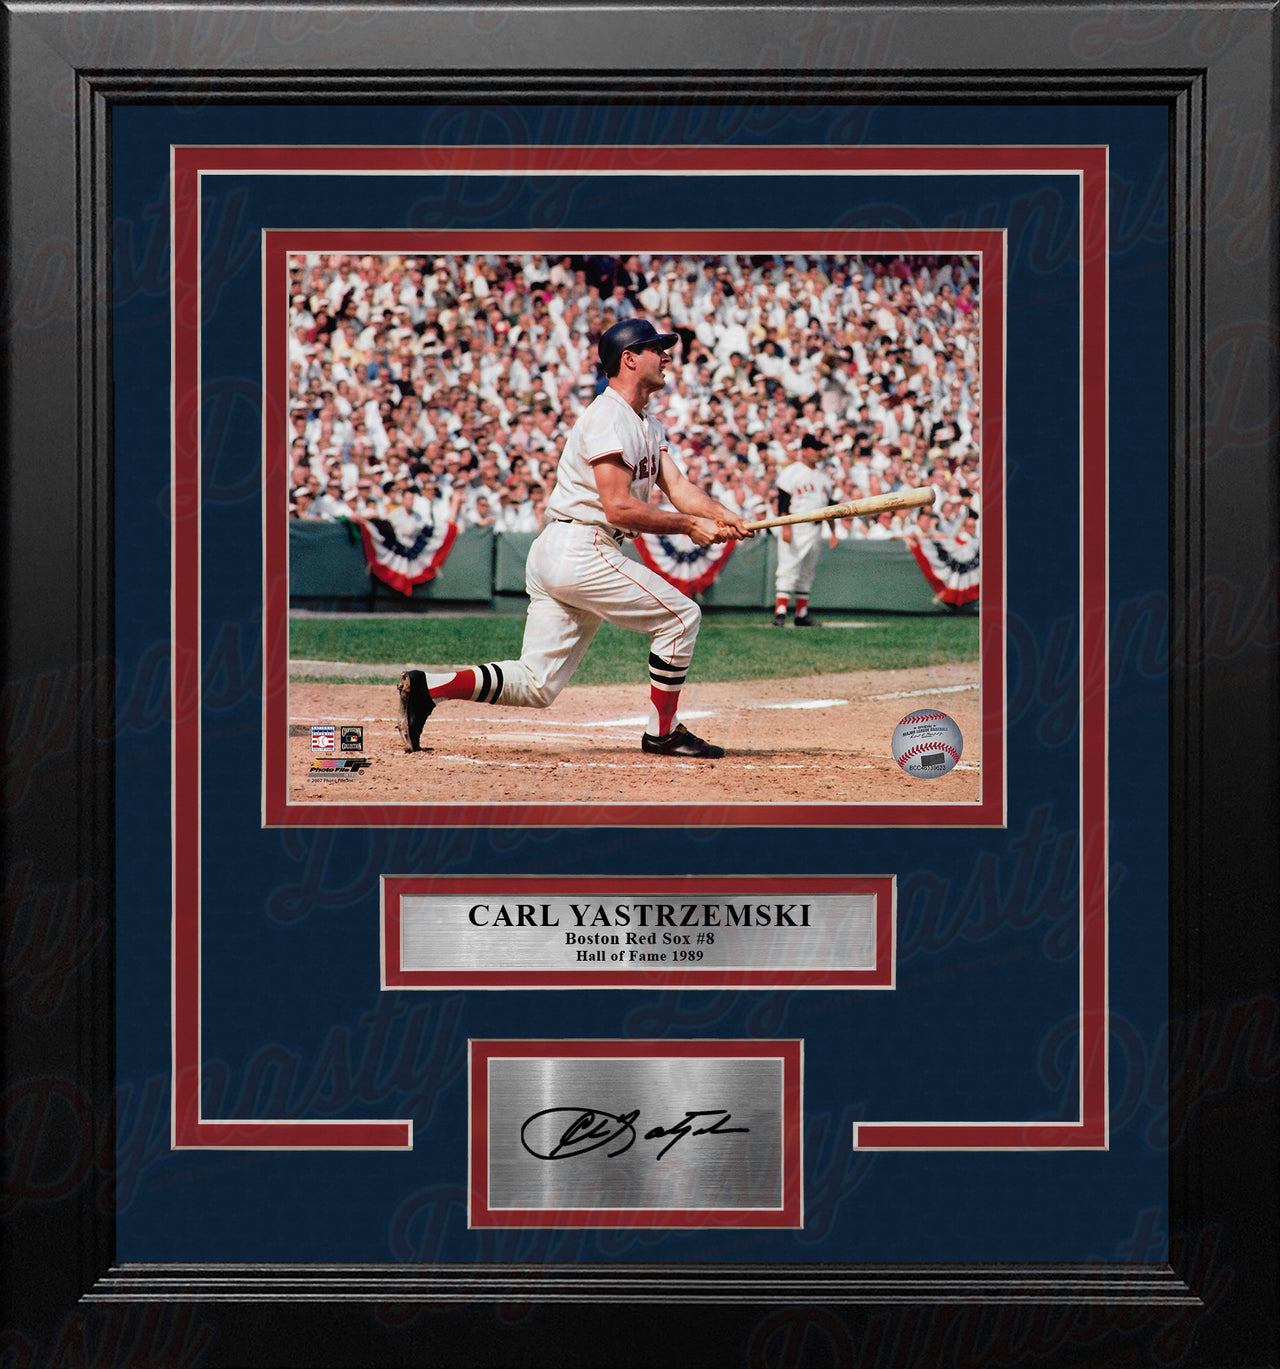 Carl Yastrzemski in Action Boston Red Sox 8" x 10" Framed Baseball Photo with Engraved Autograph - Dynasty Sports & Framing 